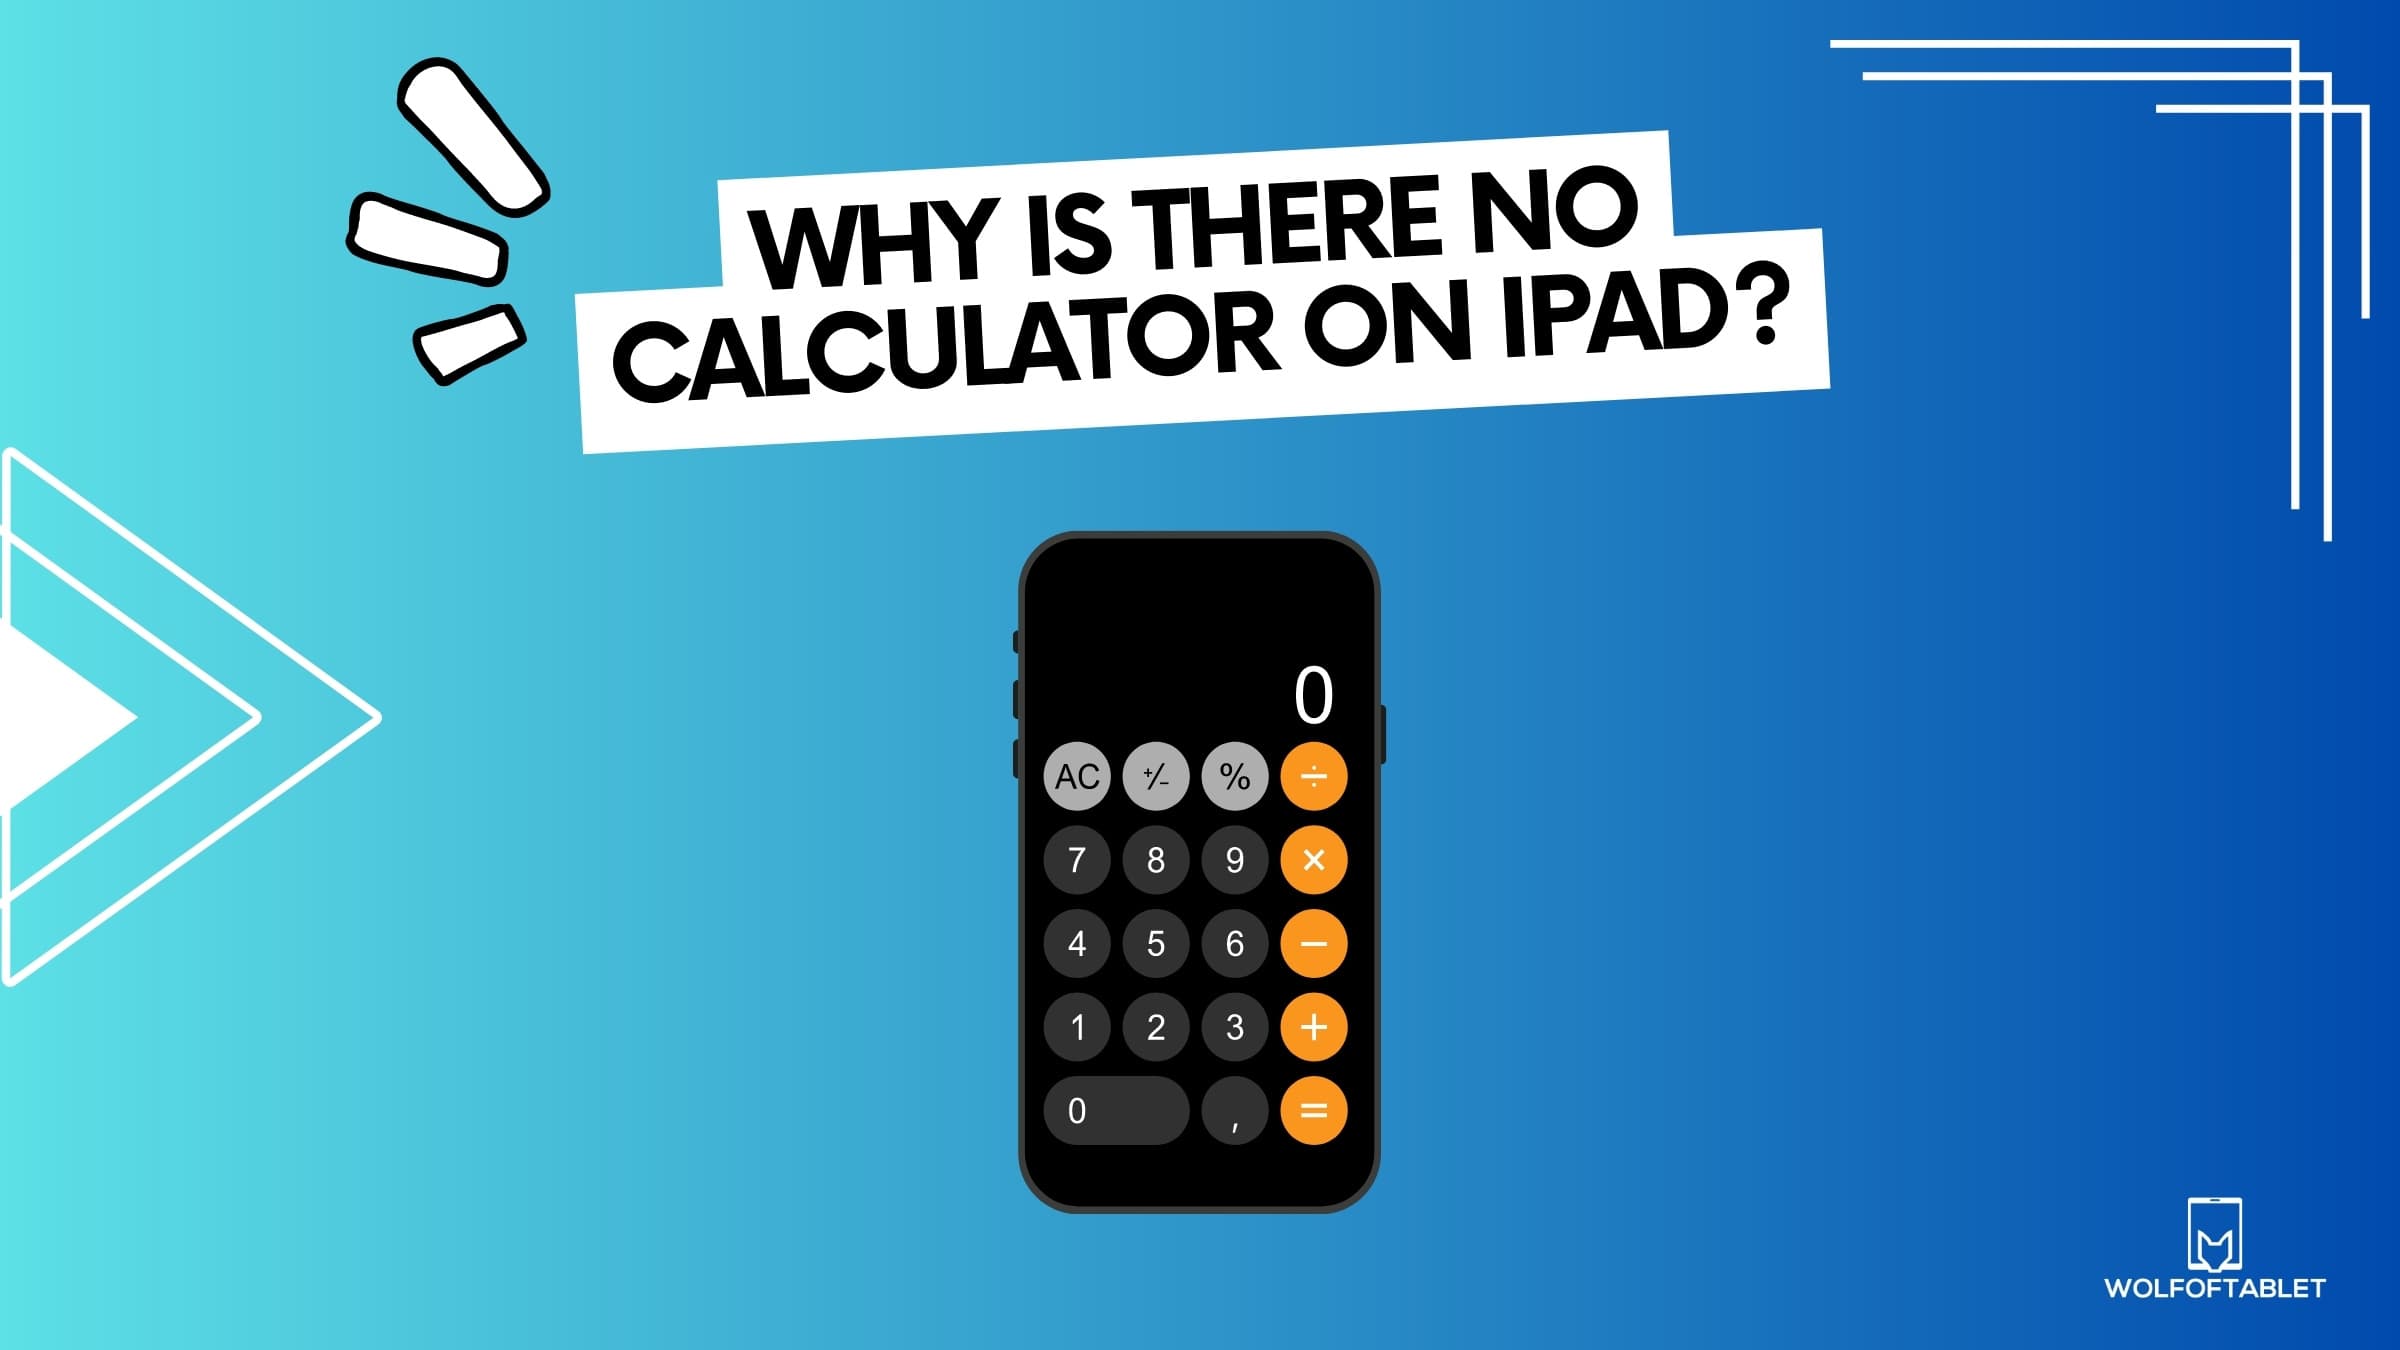 find out why there is no calculator app pn ipad and what are the top 3 alternatives